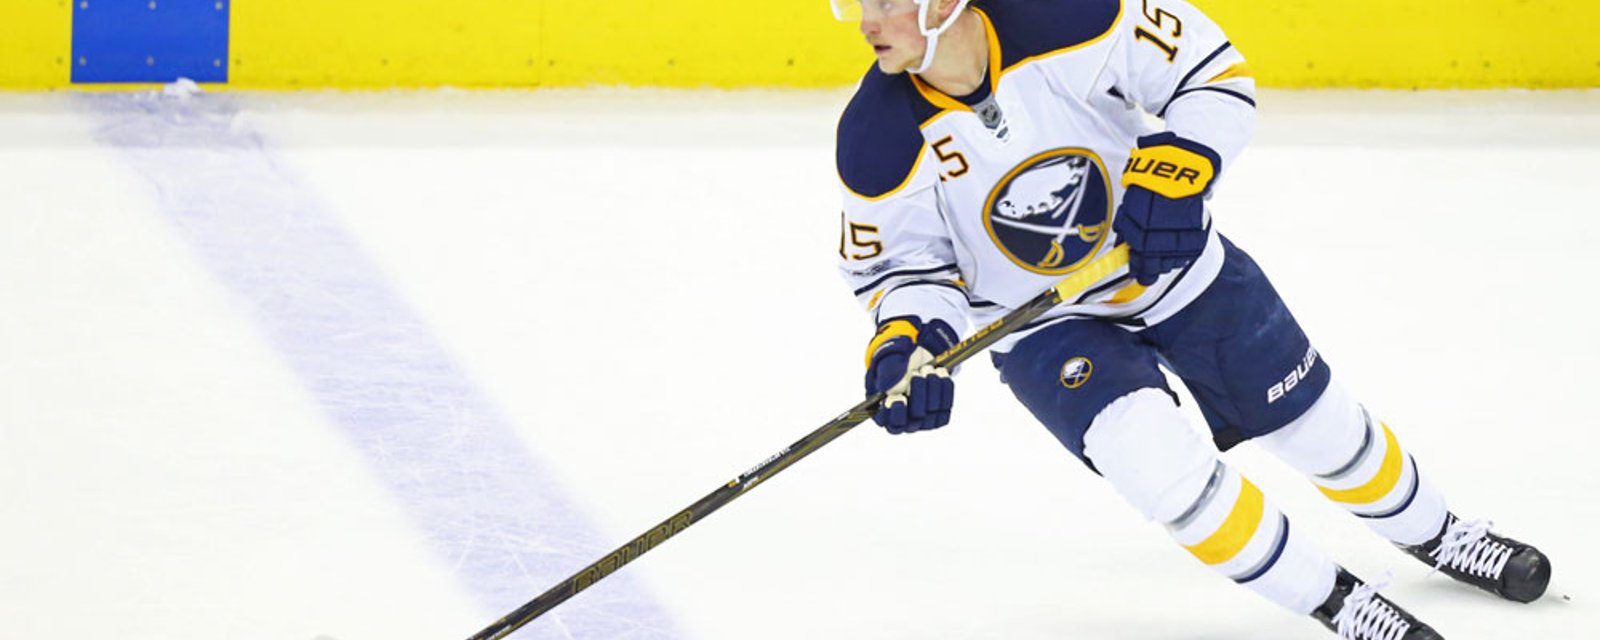 Breaking: Jack Eichel on the verge of signing a huge extension!